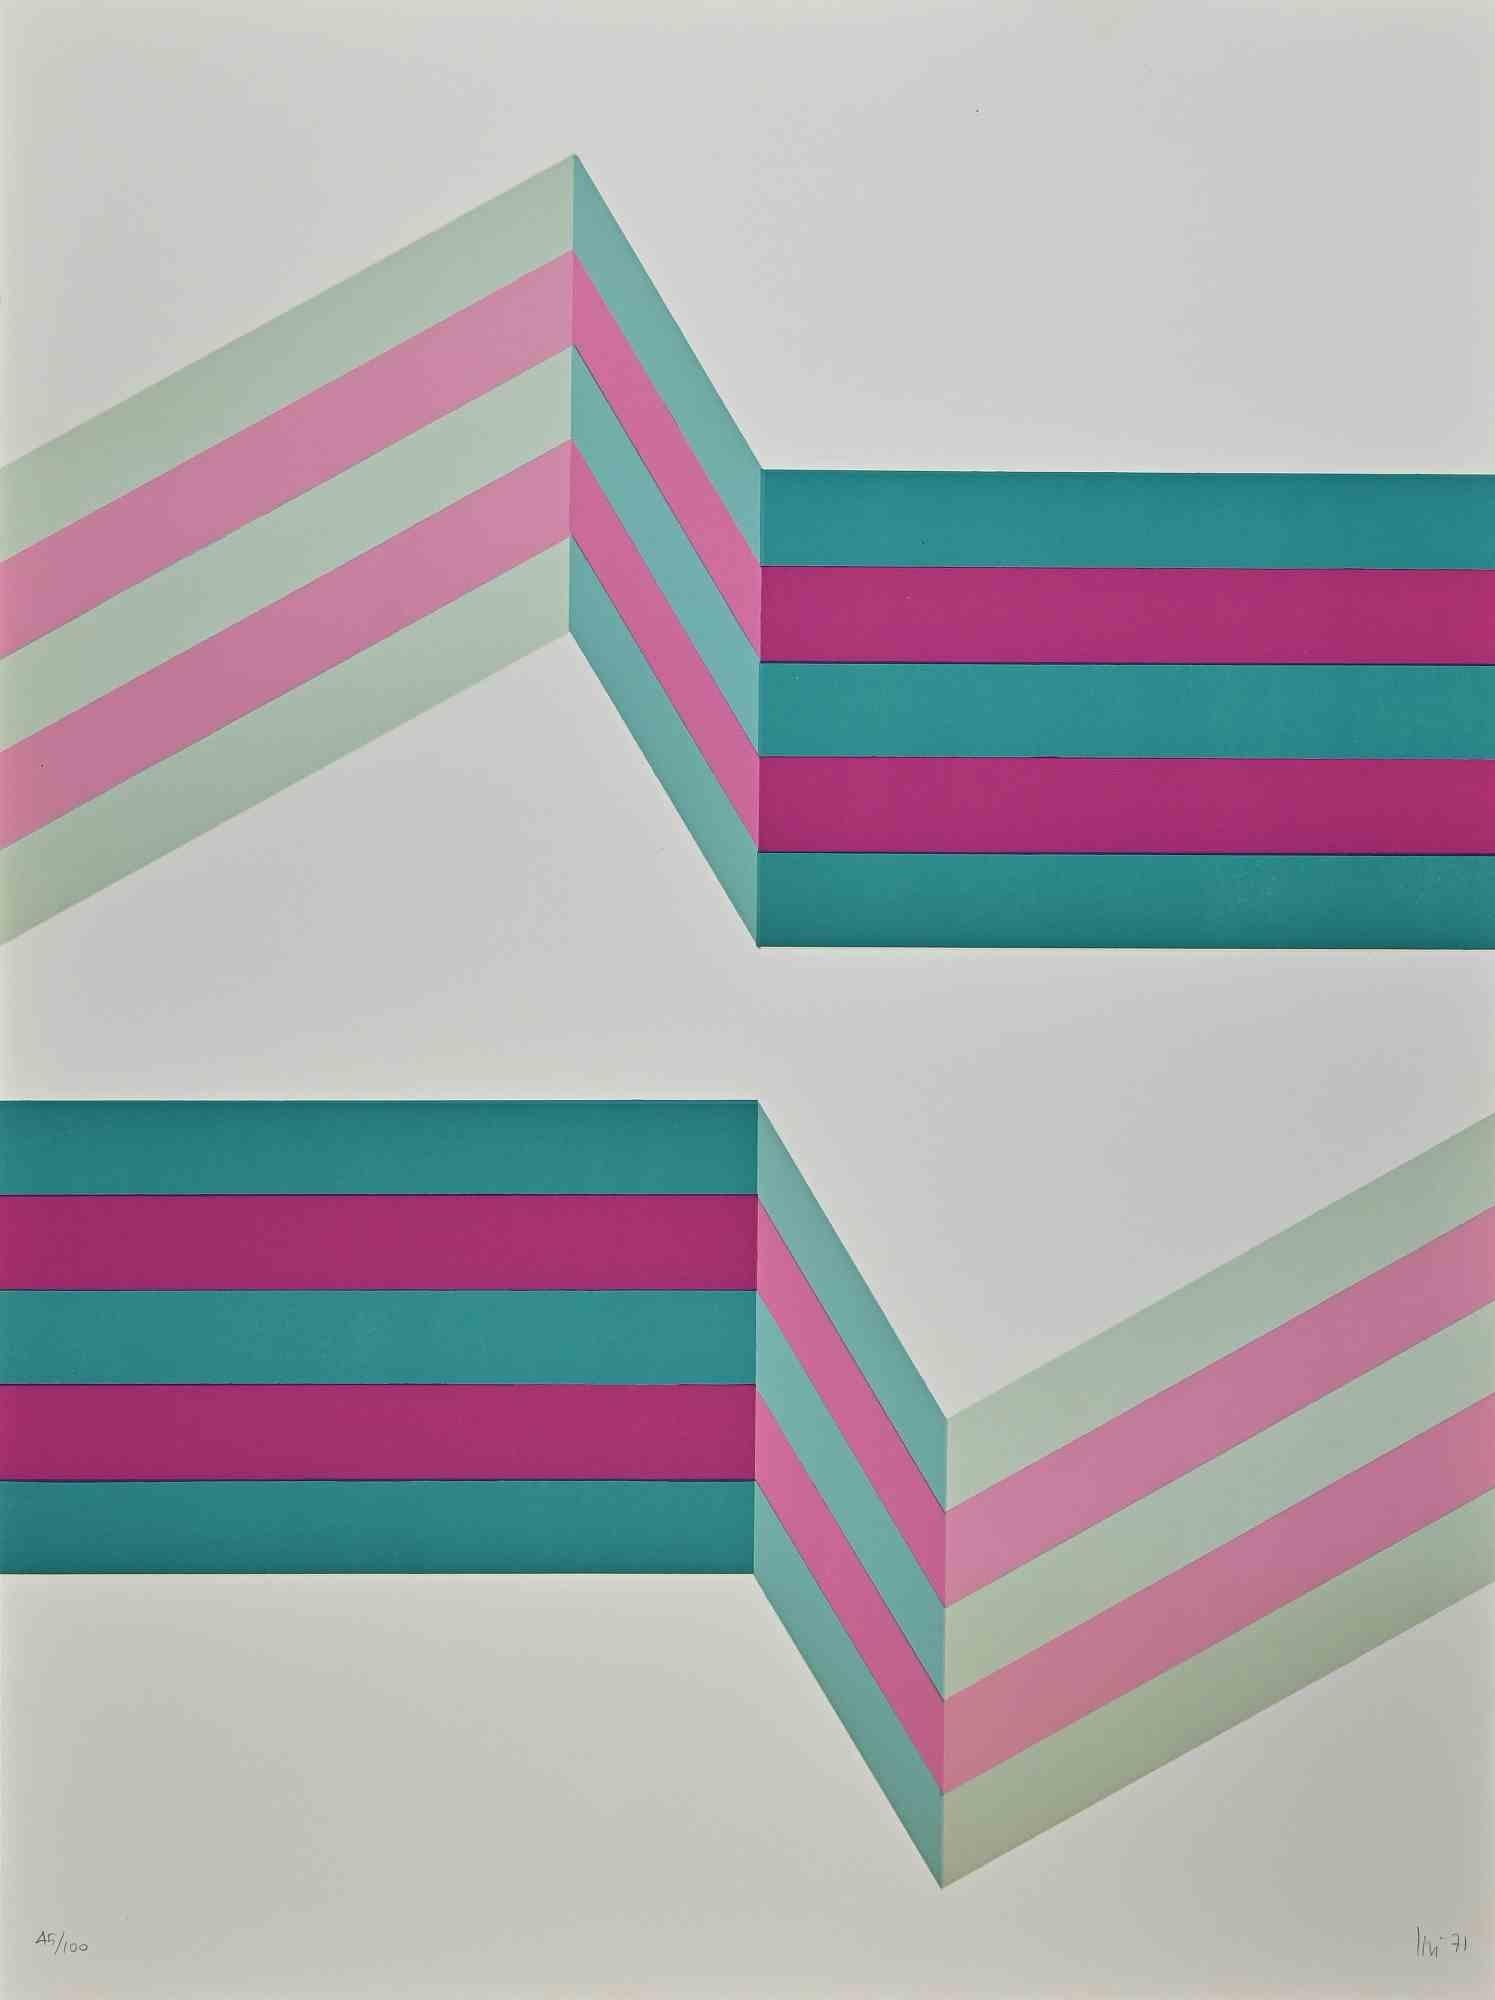 Abstract Composition is a lithograph realized by Renato Livi in 1971.

Hand-signed and dated on the lower right margin.

Numbered on the lower left margin. Edition of 100 prints

Good conditions.

Abstract composition on the tones of green and pink,